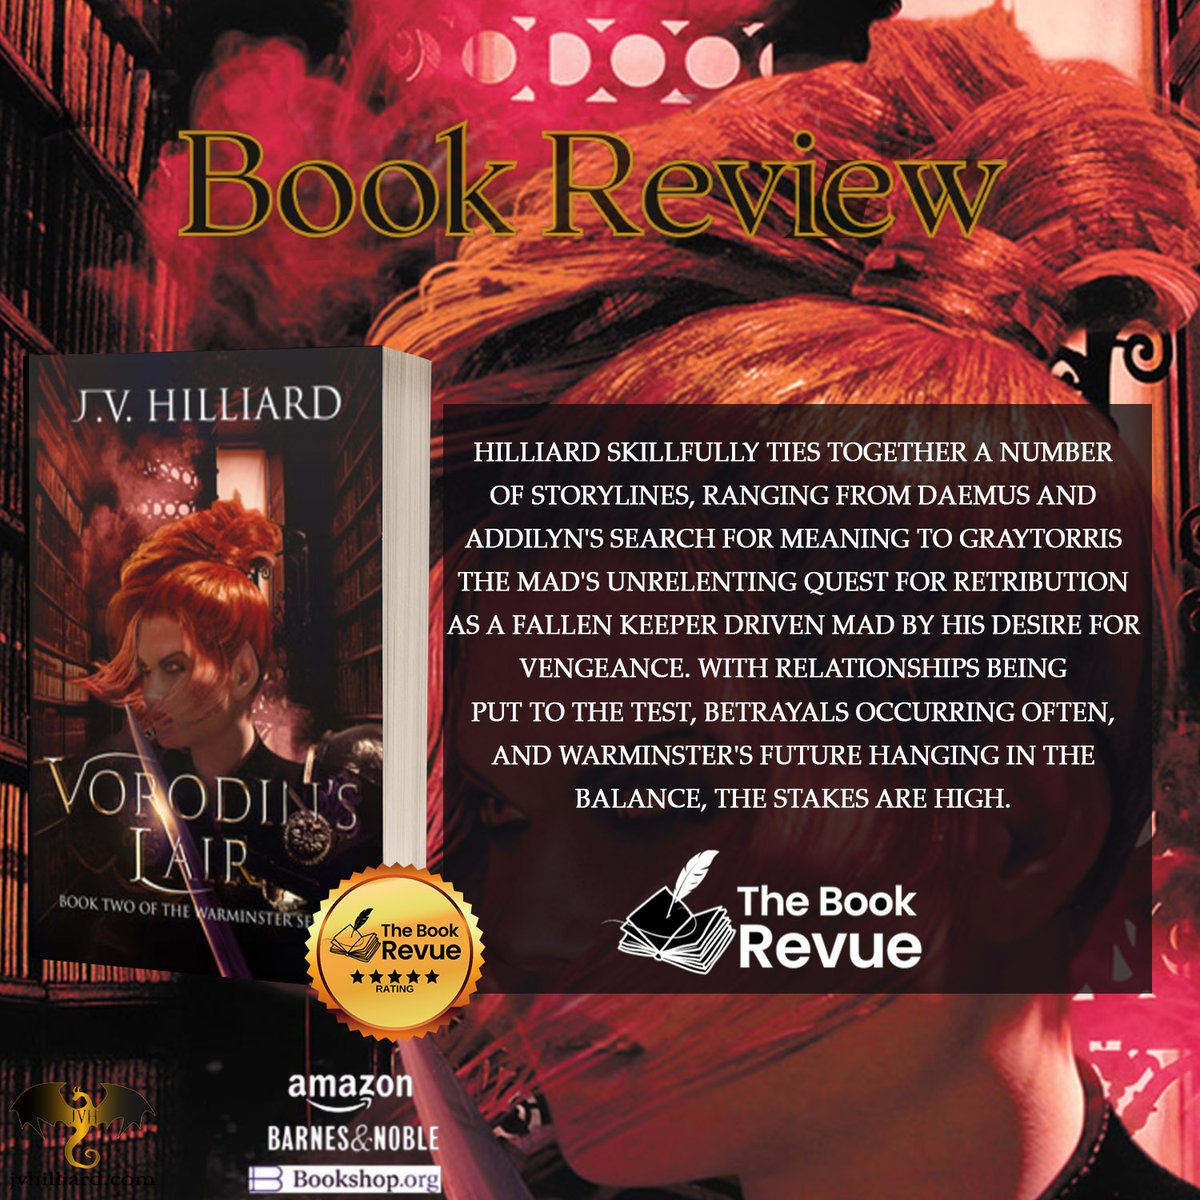 'With relationships being put to the test, betrayals occurring often, and Warminster's future hanging in the balance, the stakes are high.' Hear Ye! Hear Ye! I'd like to thank The Book Revue for a 5-star review of #VorodinsLair thebookrevue.com/post/vorodin-s… #booktwt #jvhilliard